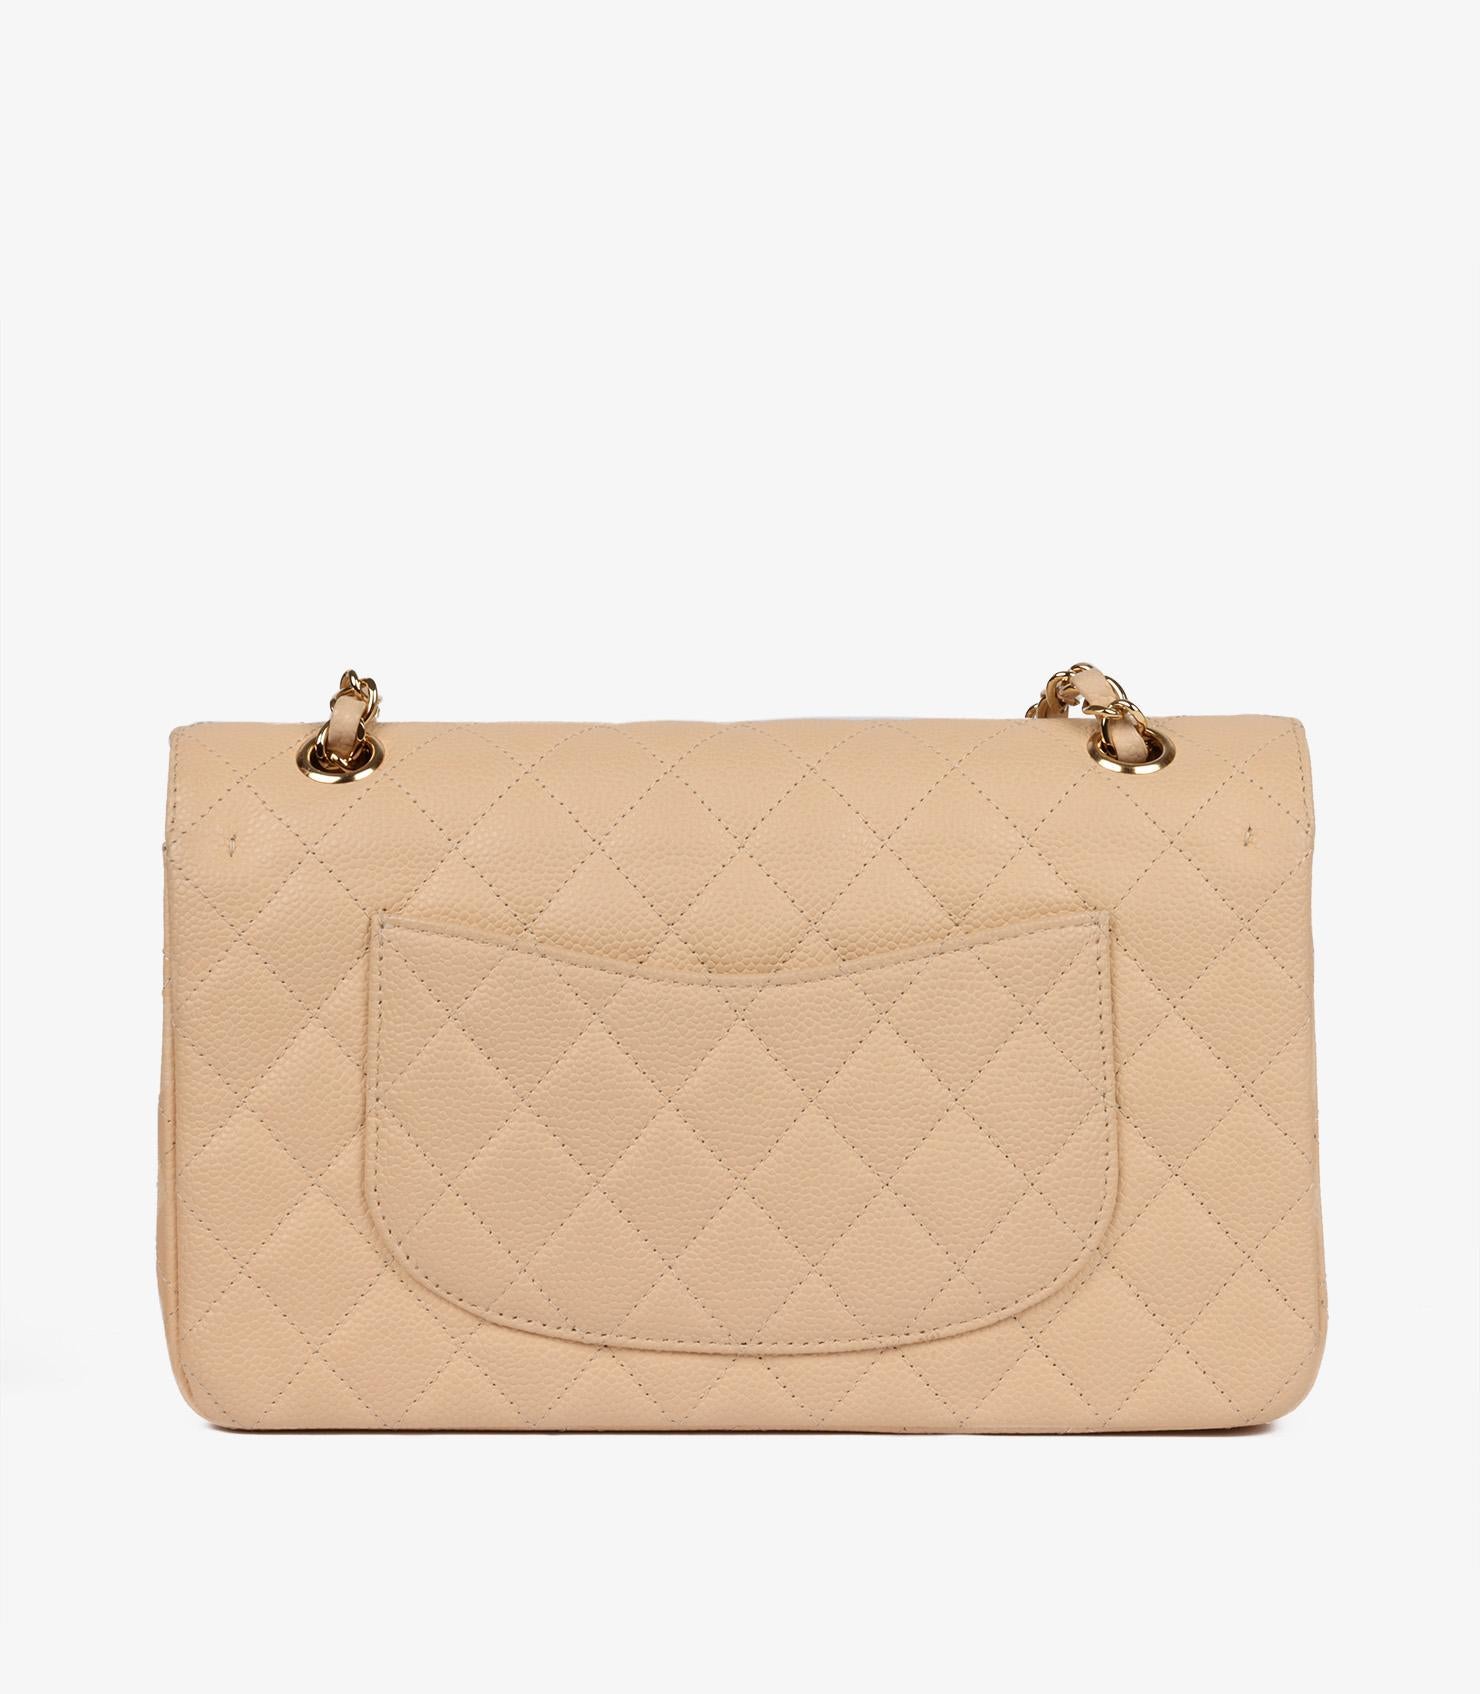 Chanel Beige Quilted Caviar Leather Medium Classic Double Flap Bag For Sale 2